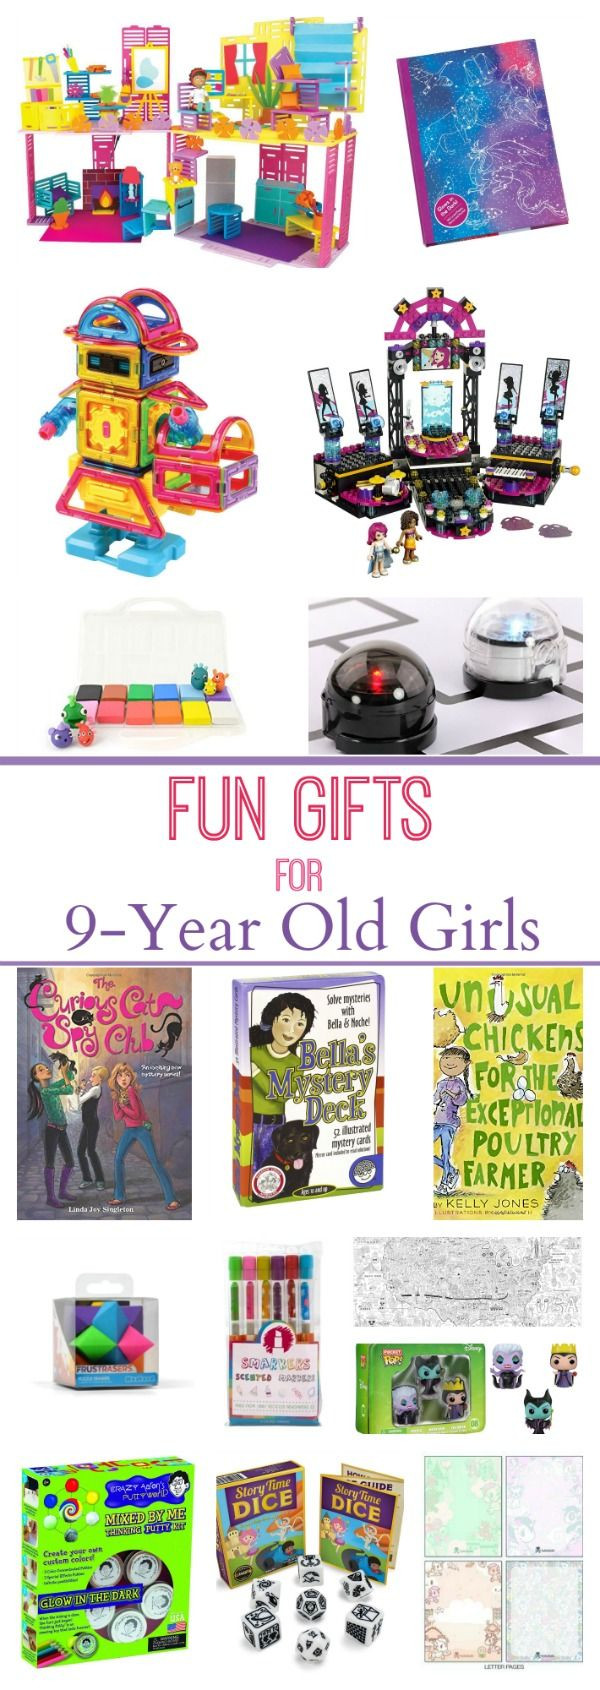 9 Year Girl Birthday Gift Ideas
 Gifts for 9 Year Old Girls